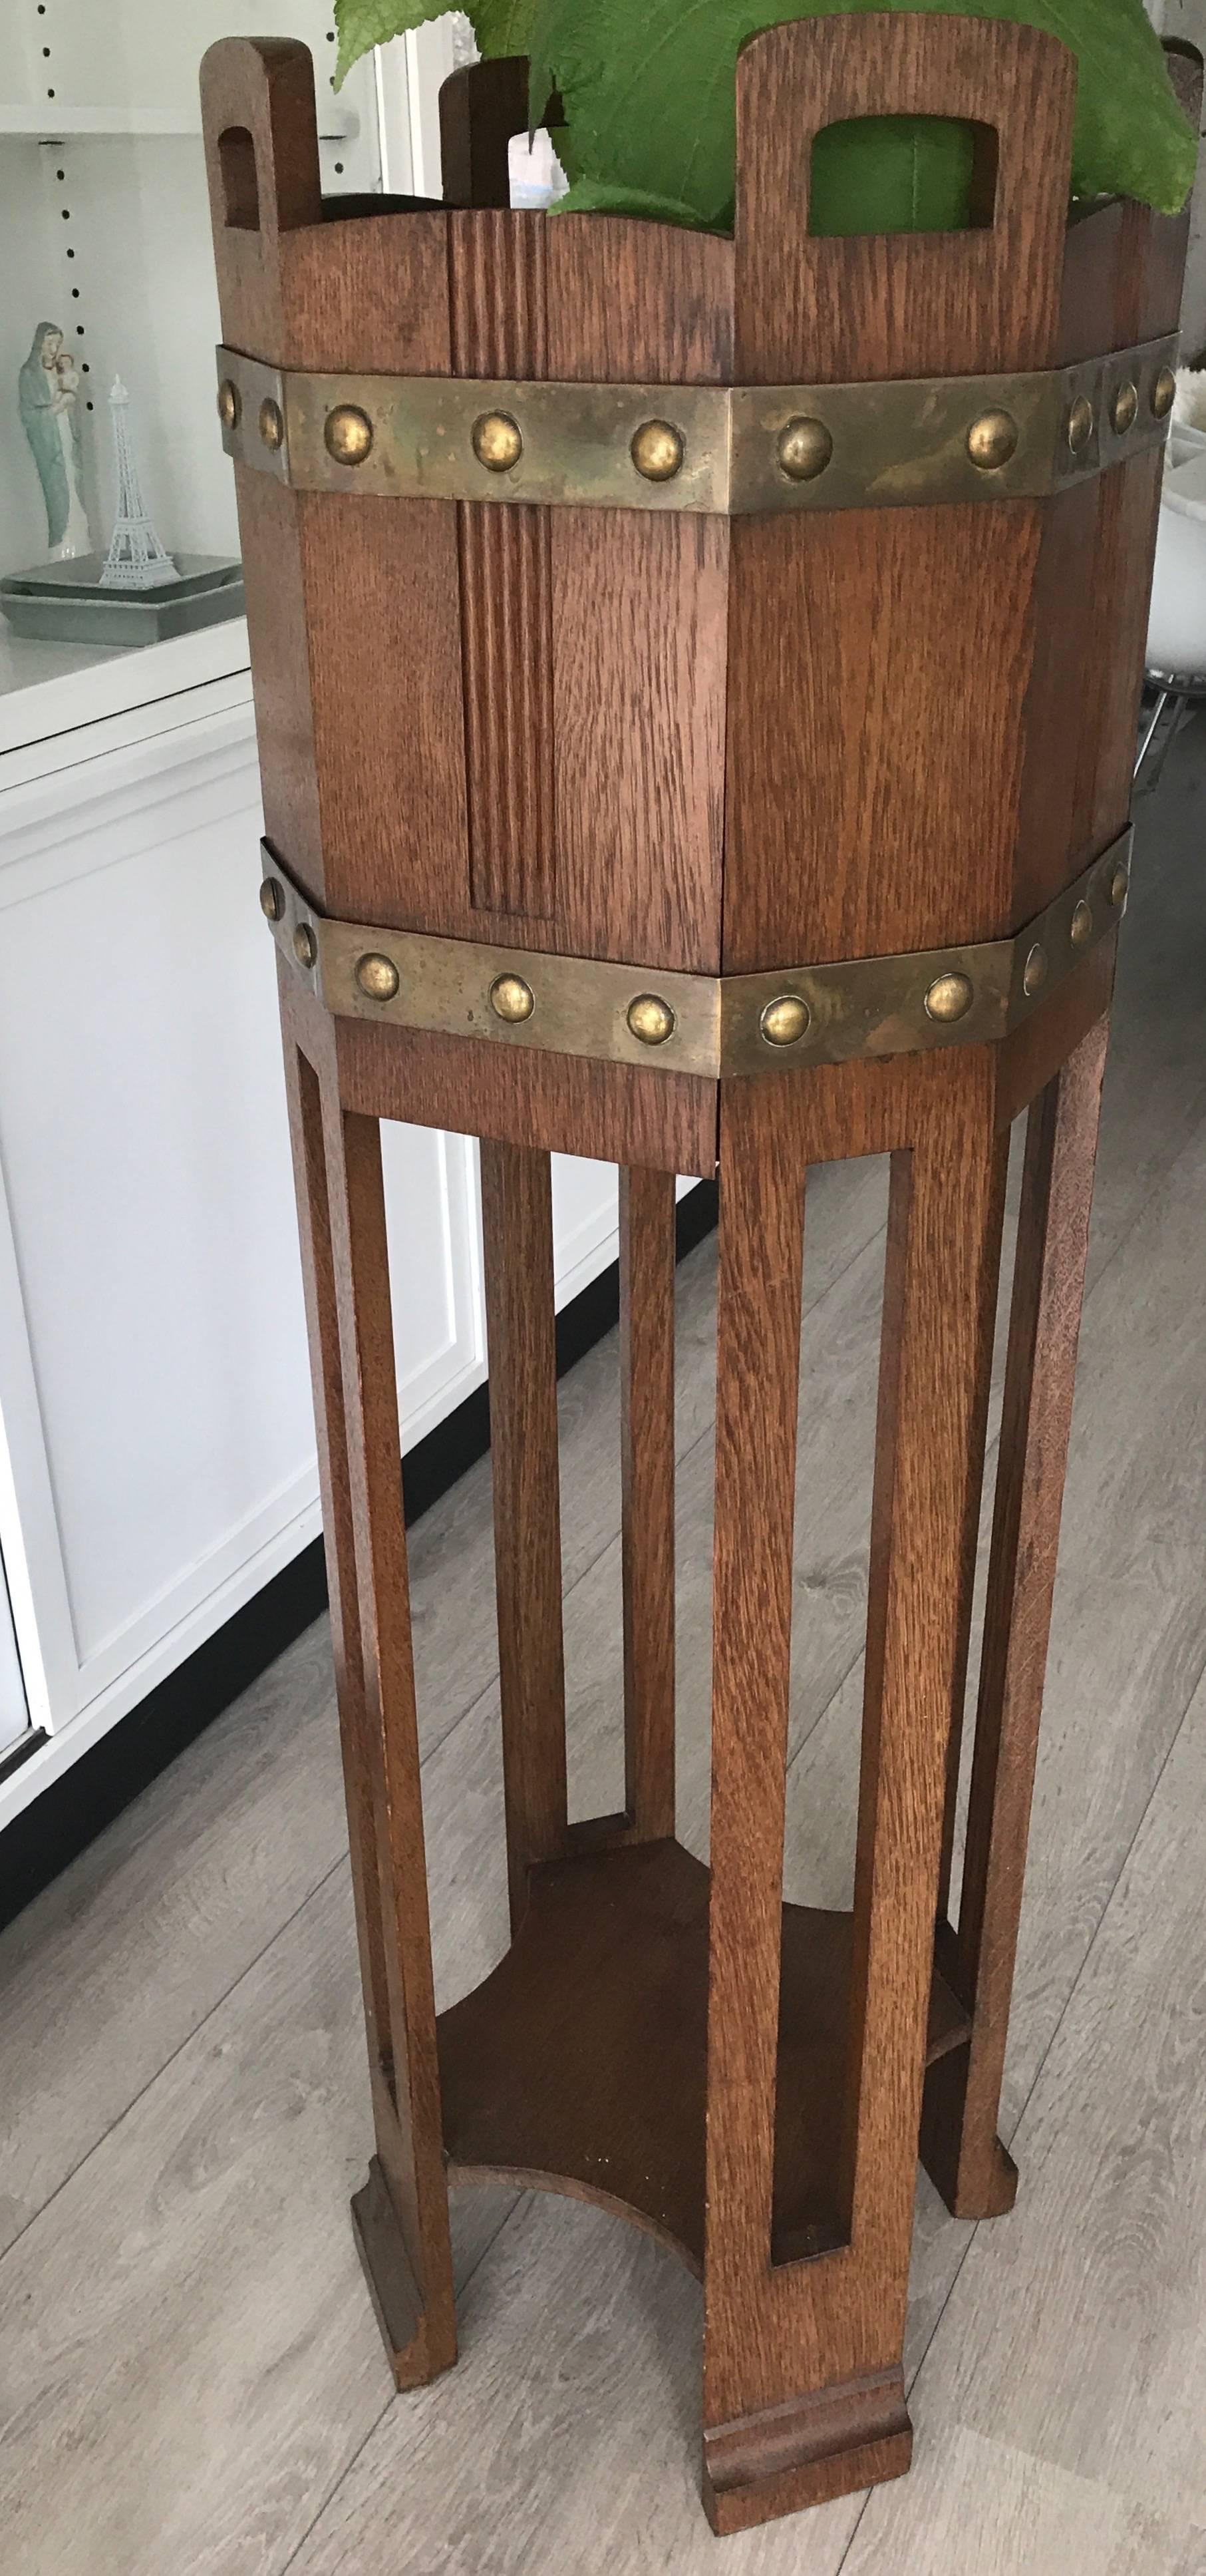 Brass Large Arts & Crafts Hand-Crafted Oak Jardiniere / Plant Stand with Copper Bands For Sale